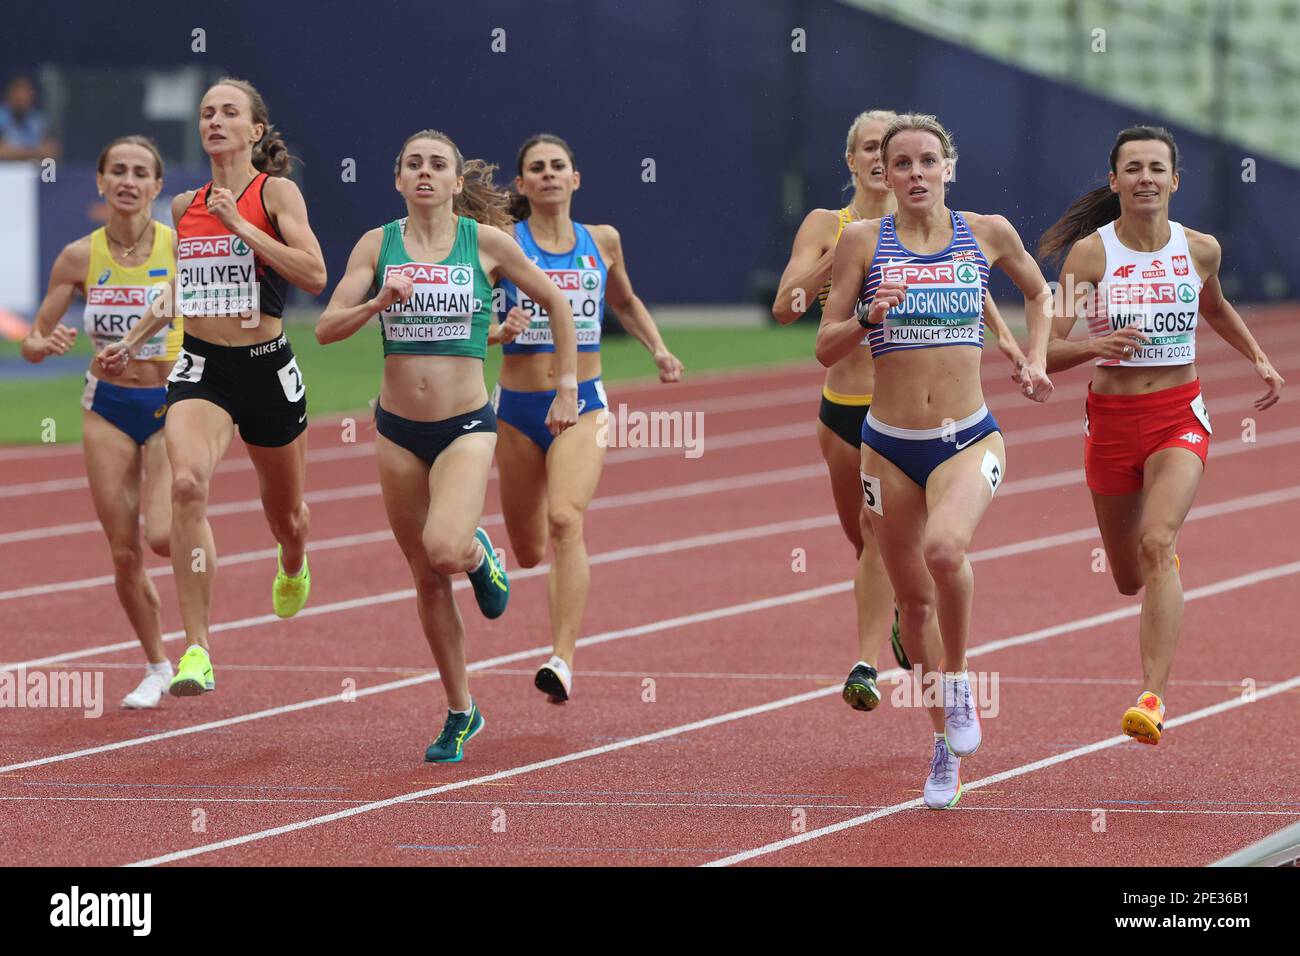 Louise SHANAHAN &  Keely HODGKINSON finishing in the 800m Semi Final at the European Athletics Championship 2022 Stock Photo